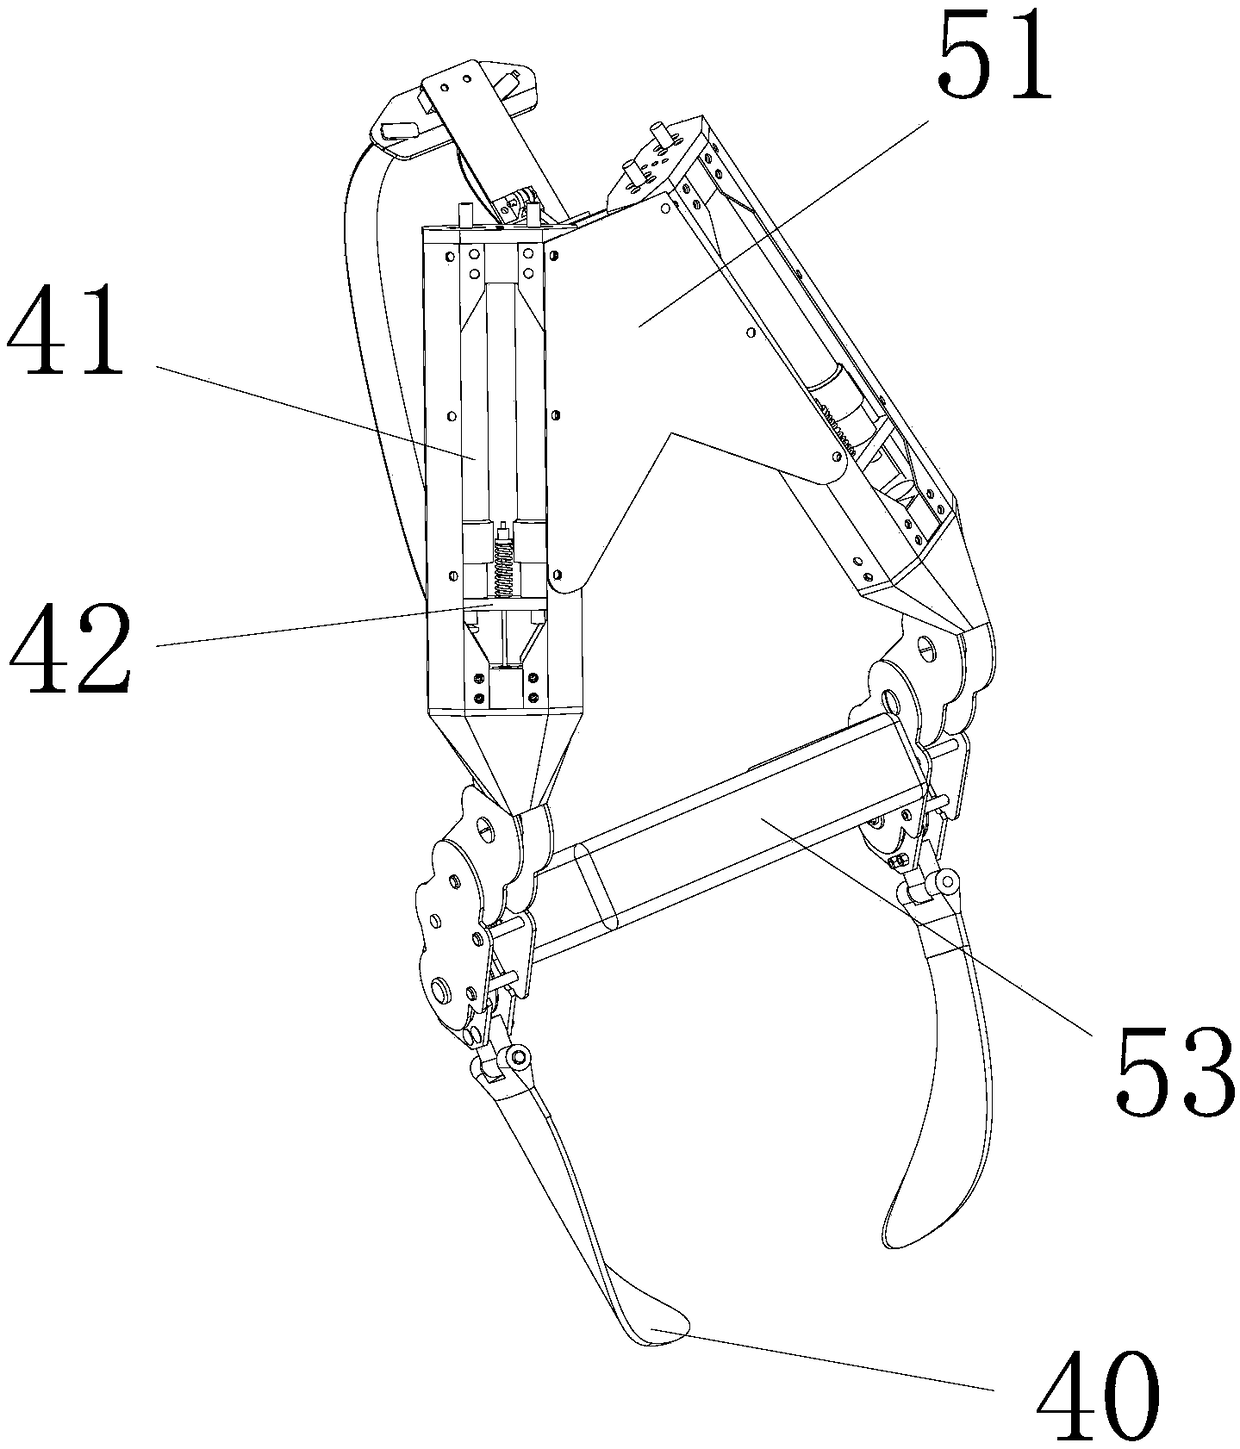 A pneumatic exoskeleton assisting device